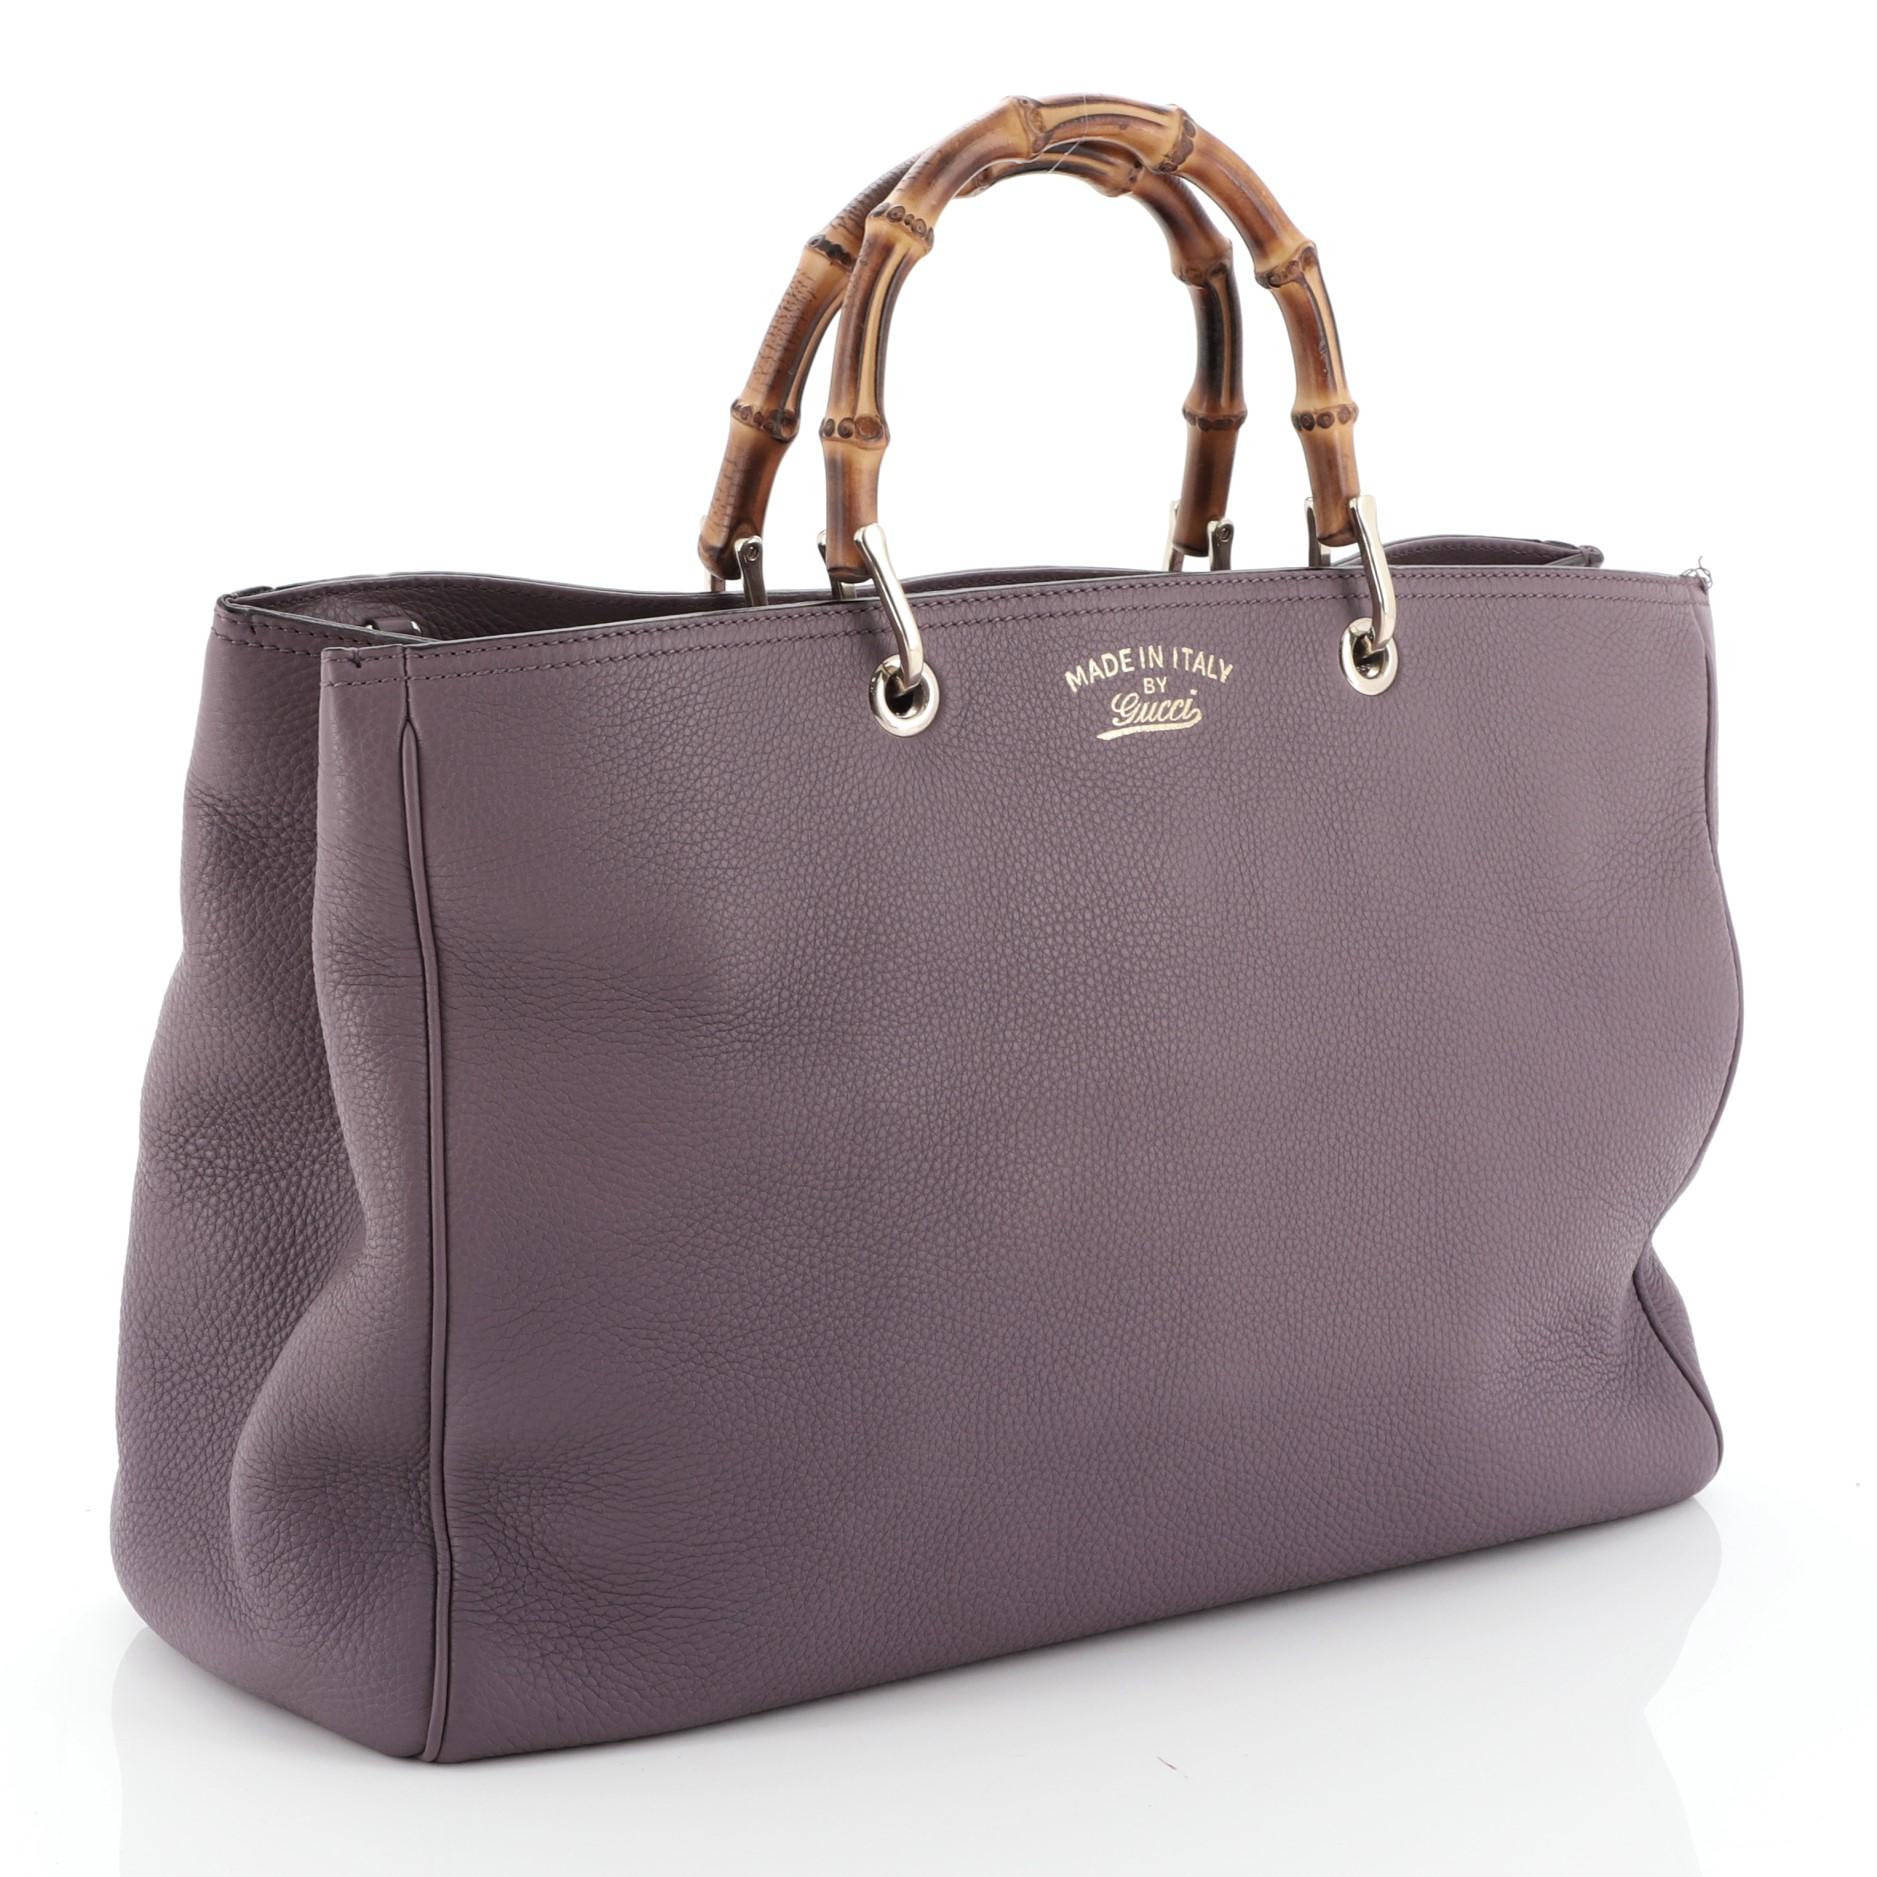 This Gucci Bamboo Shopper Tote Leather Large, crafted from purple leather, features bamboo top handles, stamped logo at the front and gold-tone hardware. Its hidden magnetic snap closure opens to a neutral fabric interior with middle zip compartment